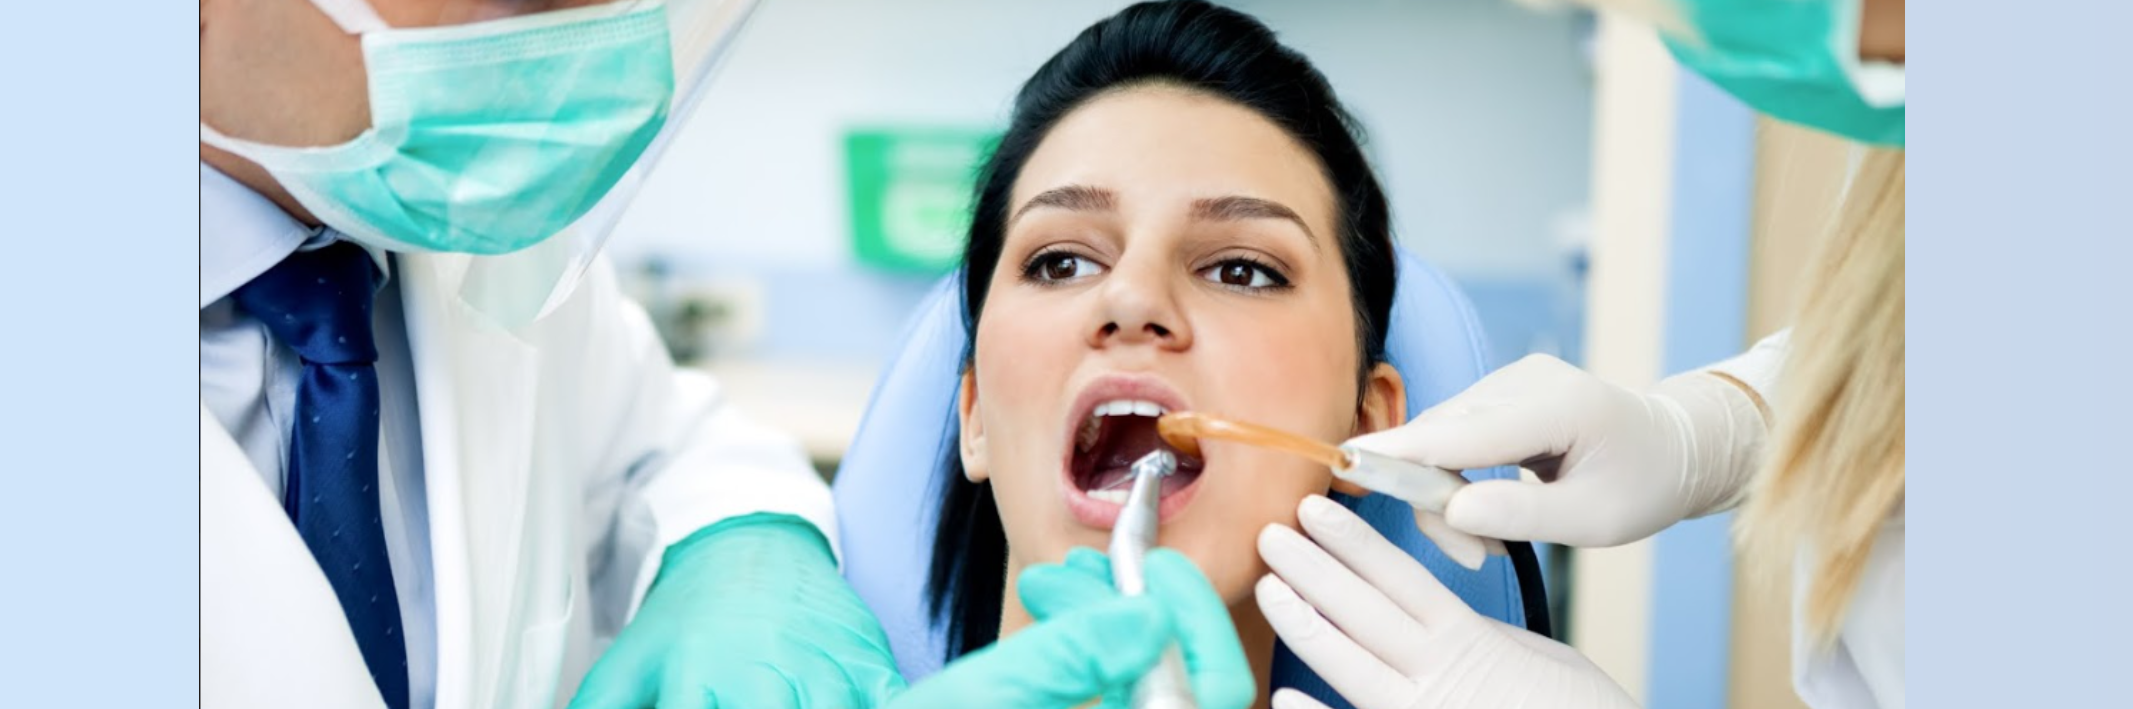 When Should You Get Your Silver Fillings Replaced?